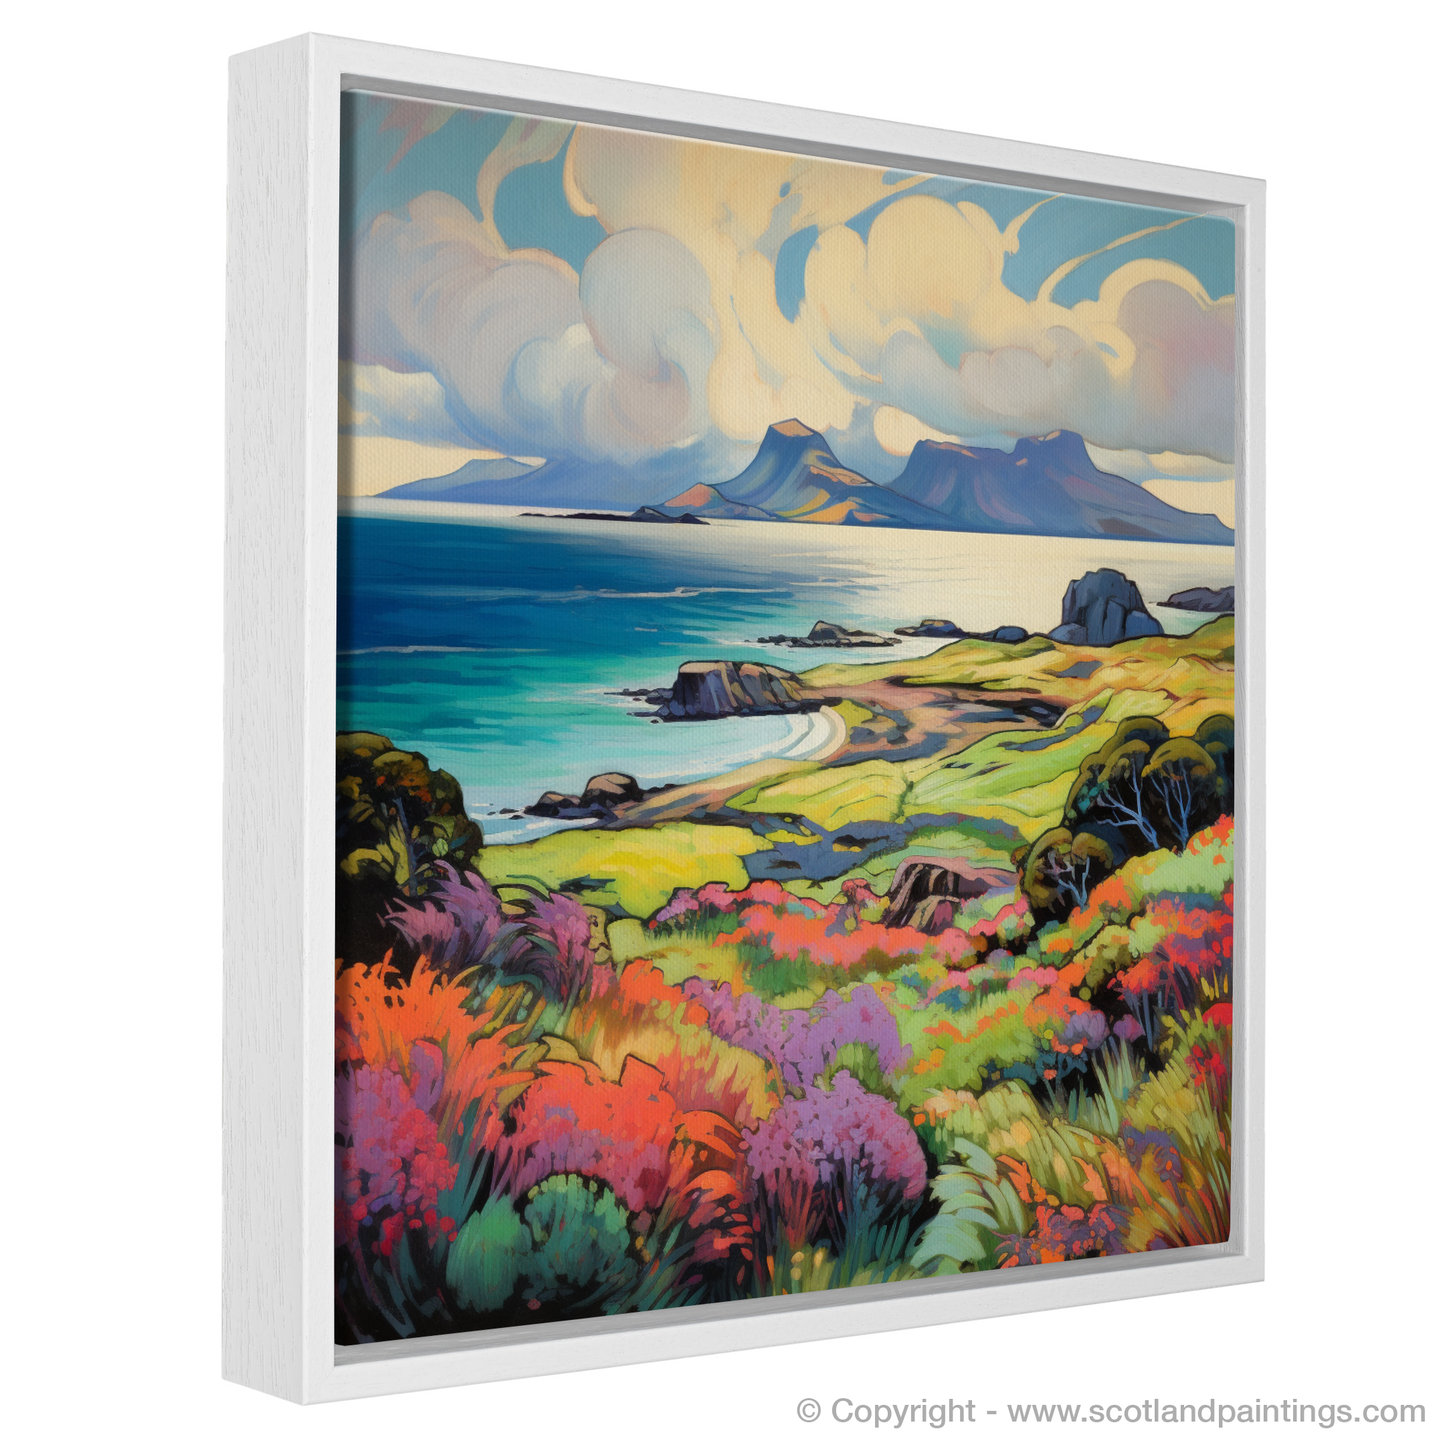 Painting and Art Print of Isle of Eigg, Inner Hebrides in summer entitled "Isle of Eigg Summer Symphony".